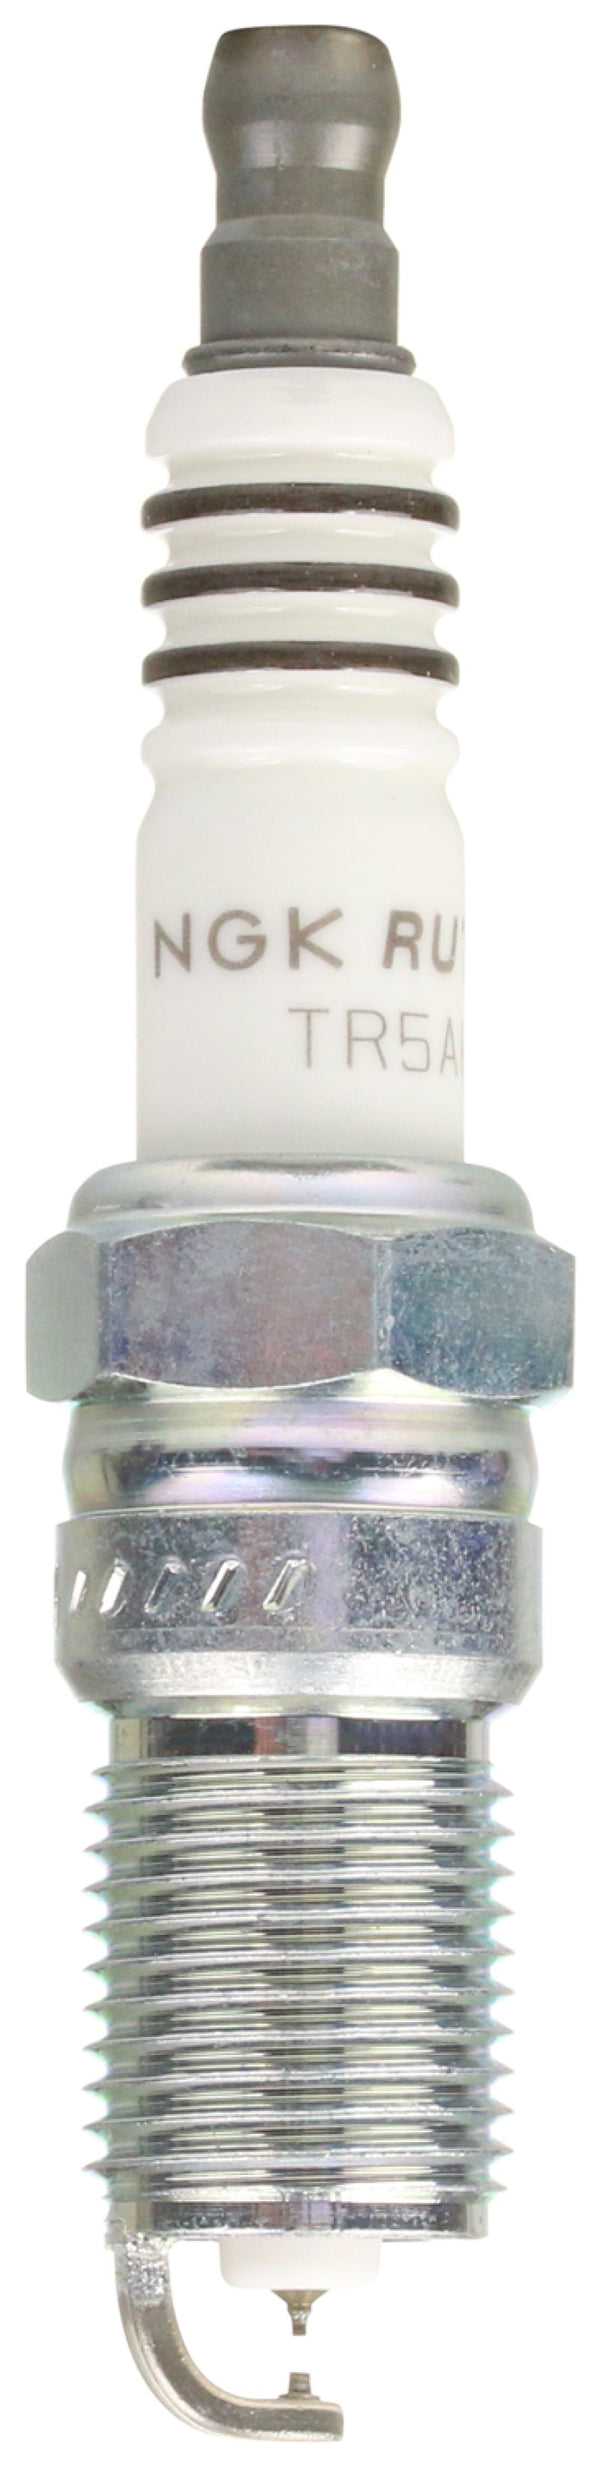 NGK Ruthenium HX Spark Plug Box of 4 (TR5AHX) - Premium Spark Plugs from NGK - Just 185.33 SR! Shop now at Motors